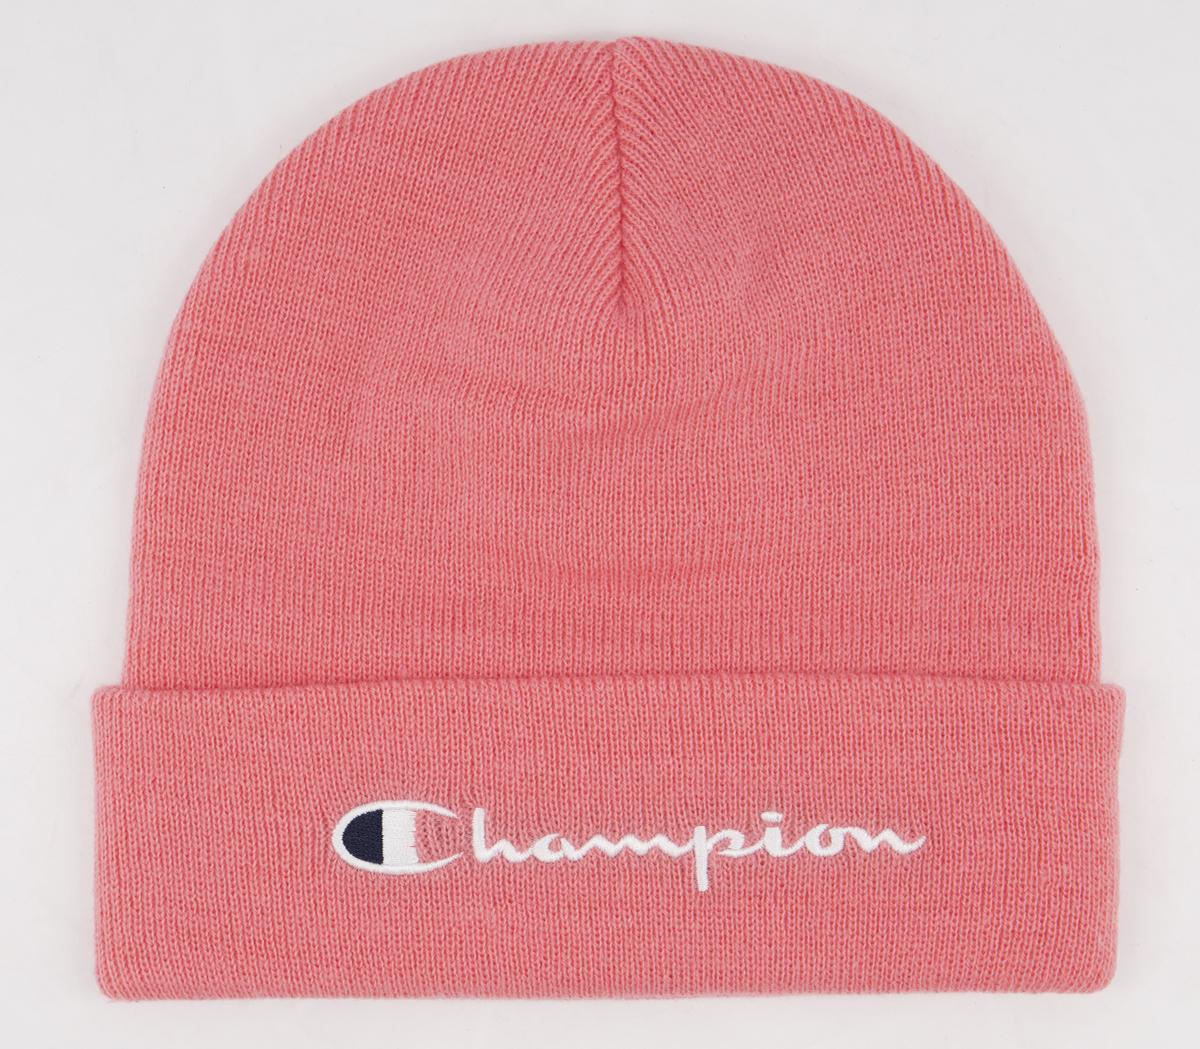 ChampionRochester Beanie Cap FCoral Pink